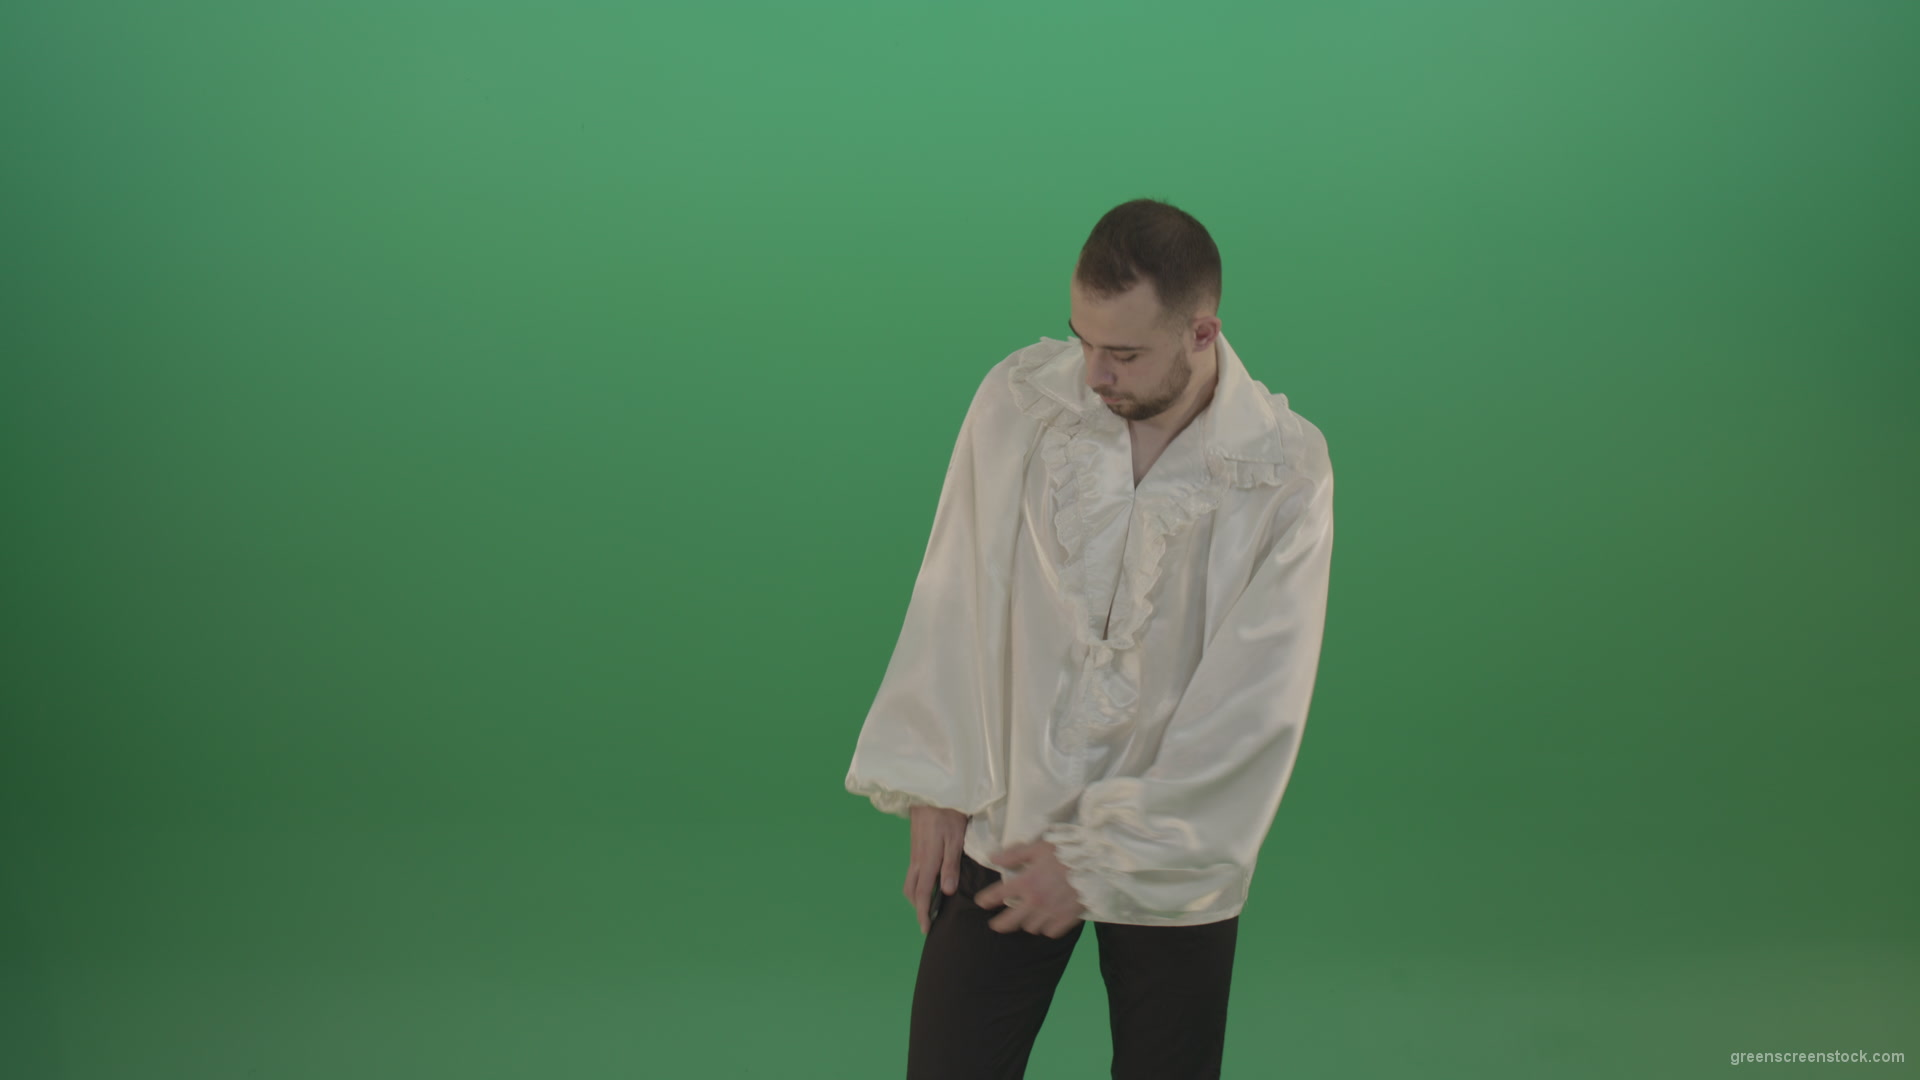 Guy-makes-a-selphi-and-posing-to-the-camera-isolated-on-green-screen_002 Green Screen Stock